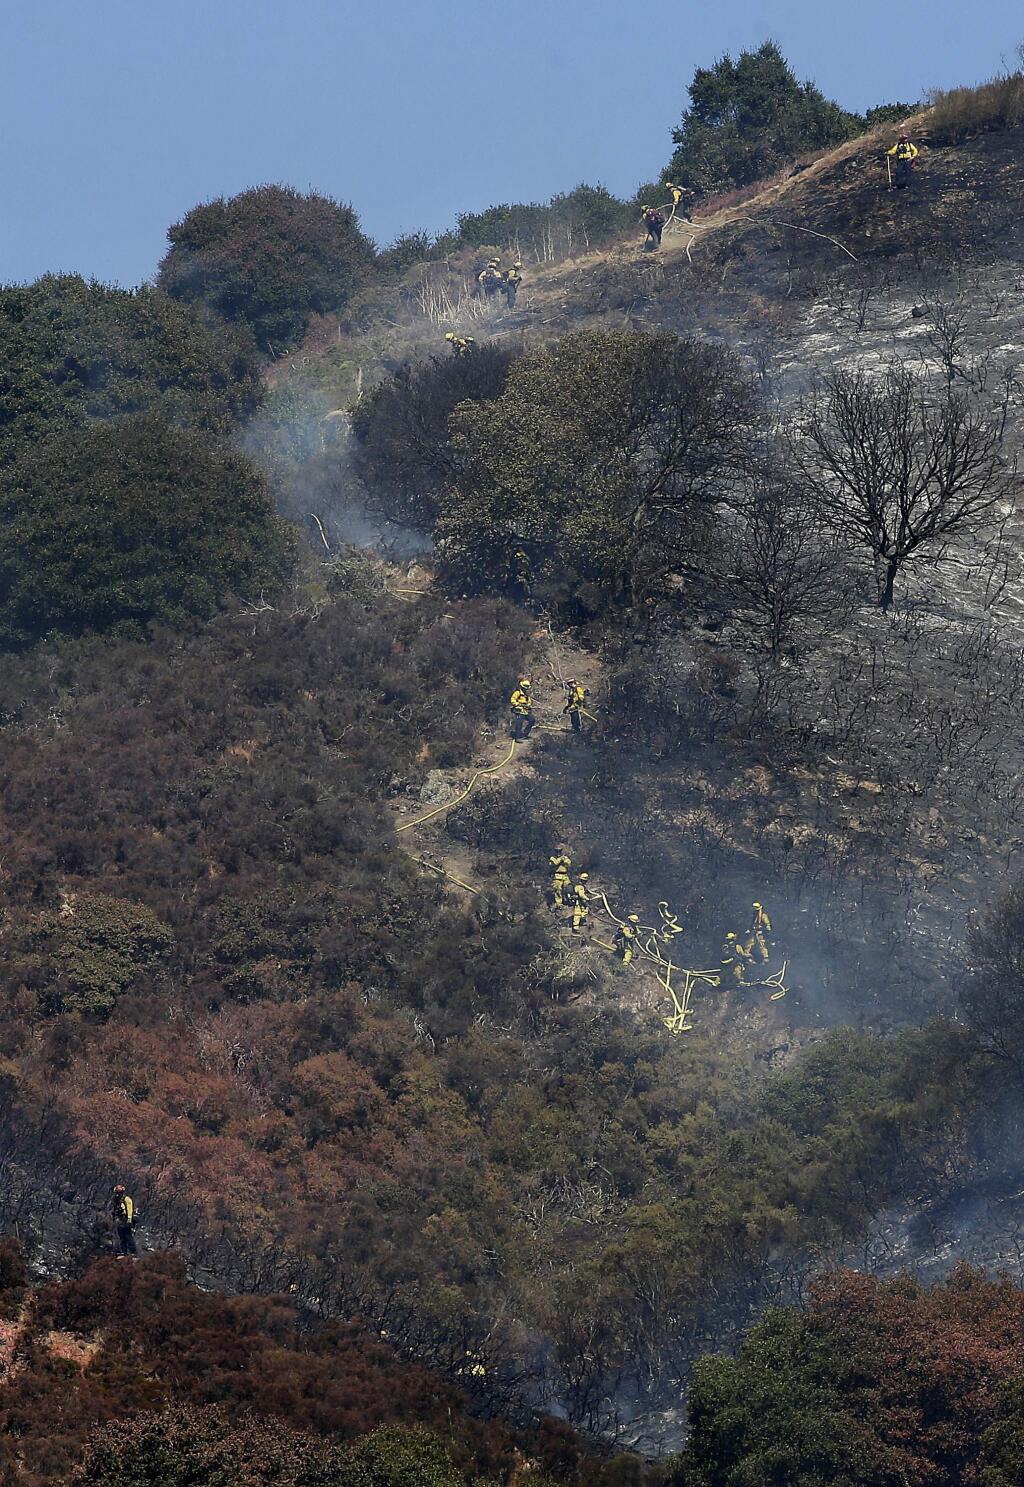 A crew of firefighters work along the Oakland Hills in Oakland, Calif., Tuesday, Sept. 26, 2017. Officials in Oakland say residents were being evacuated from an area near a fast-moving grass fire that was threatening at least 50 structures including several homes. (AP Photo/Jeff Chiu)